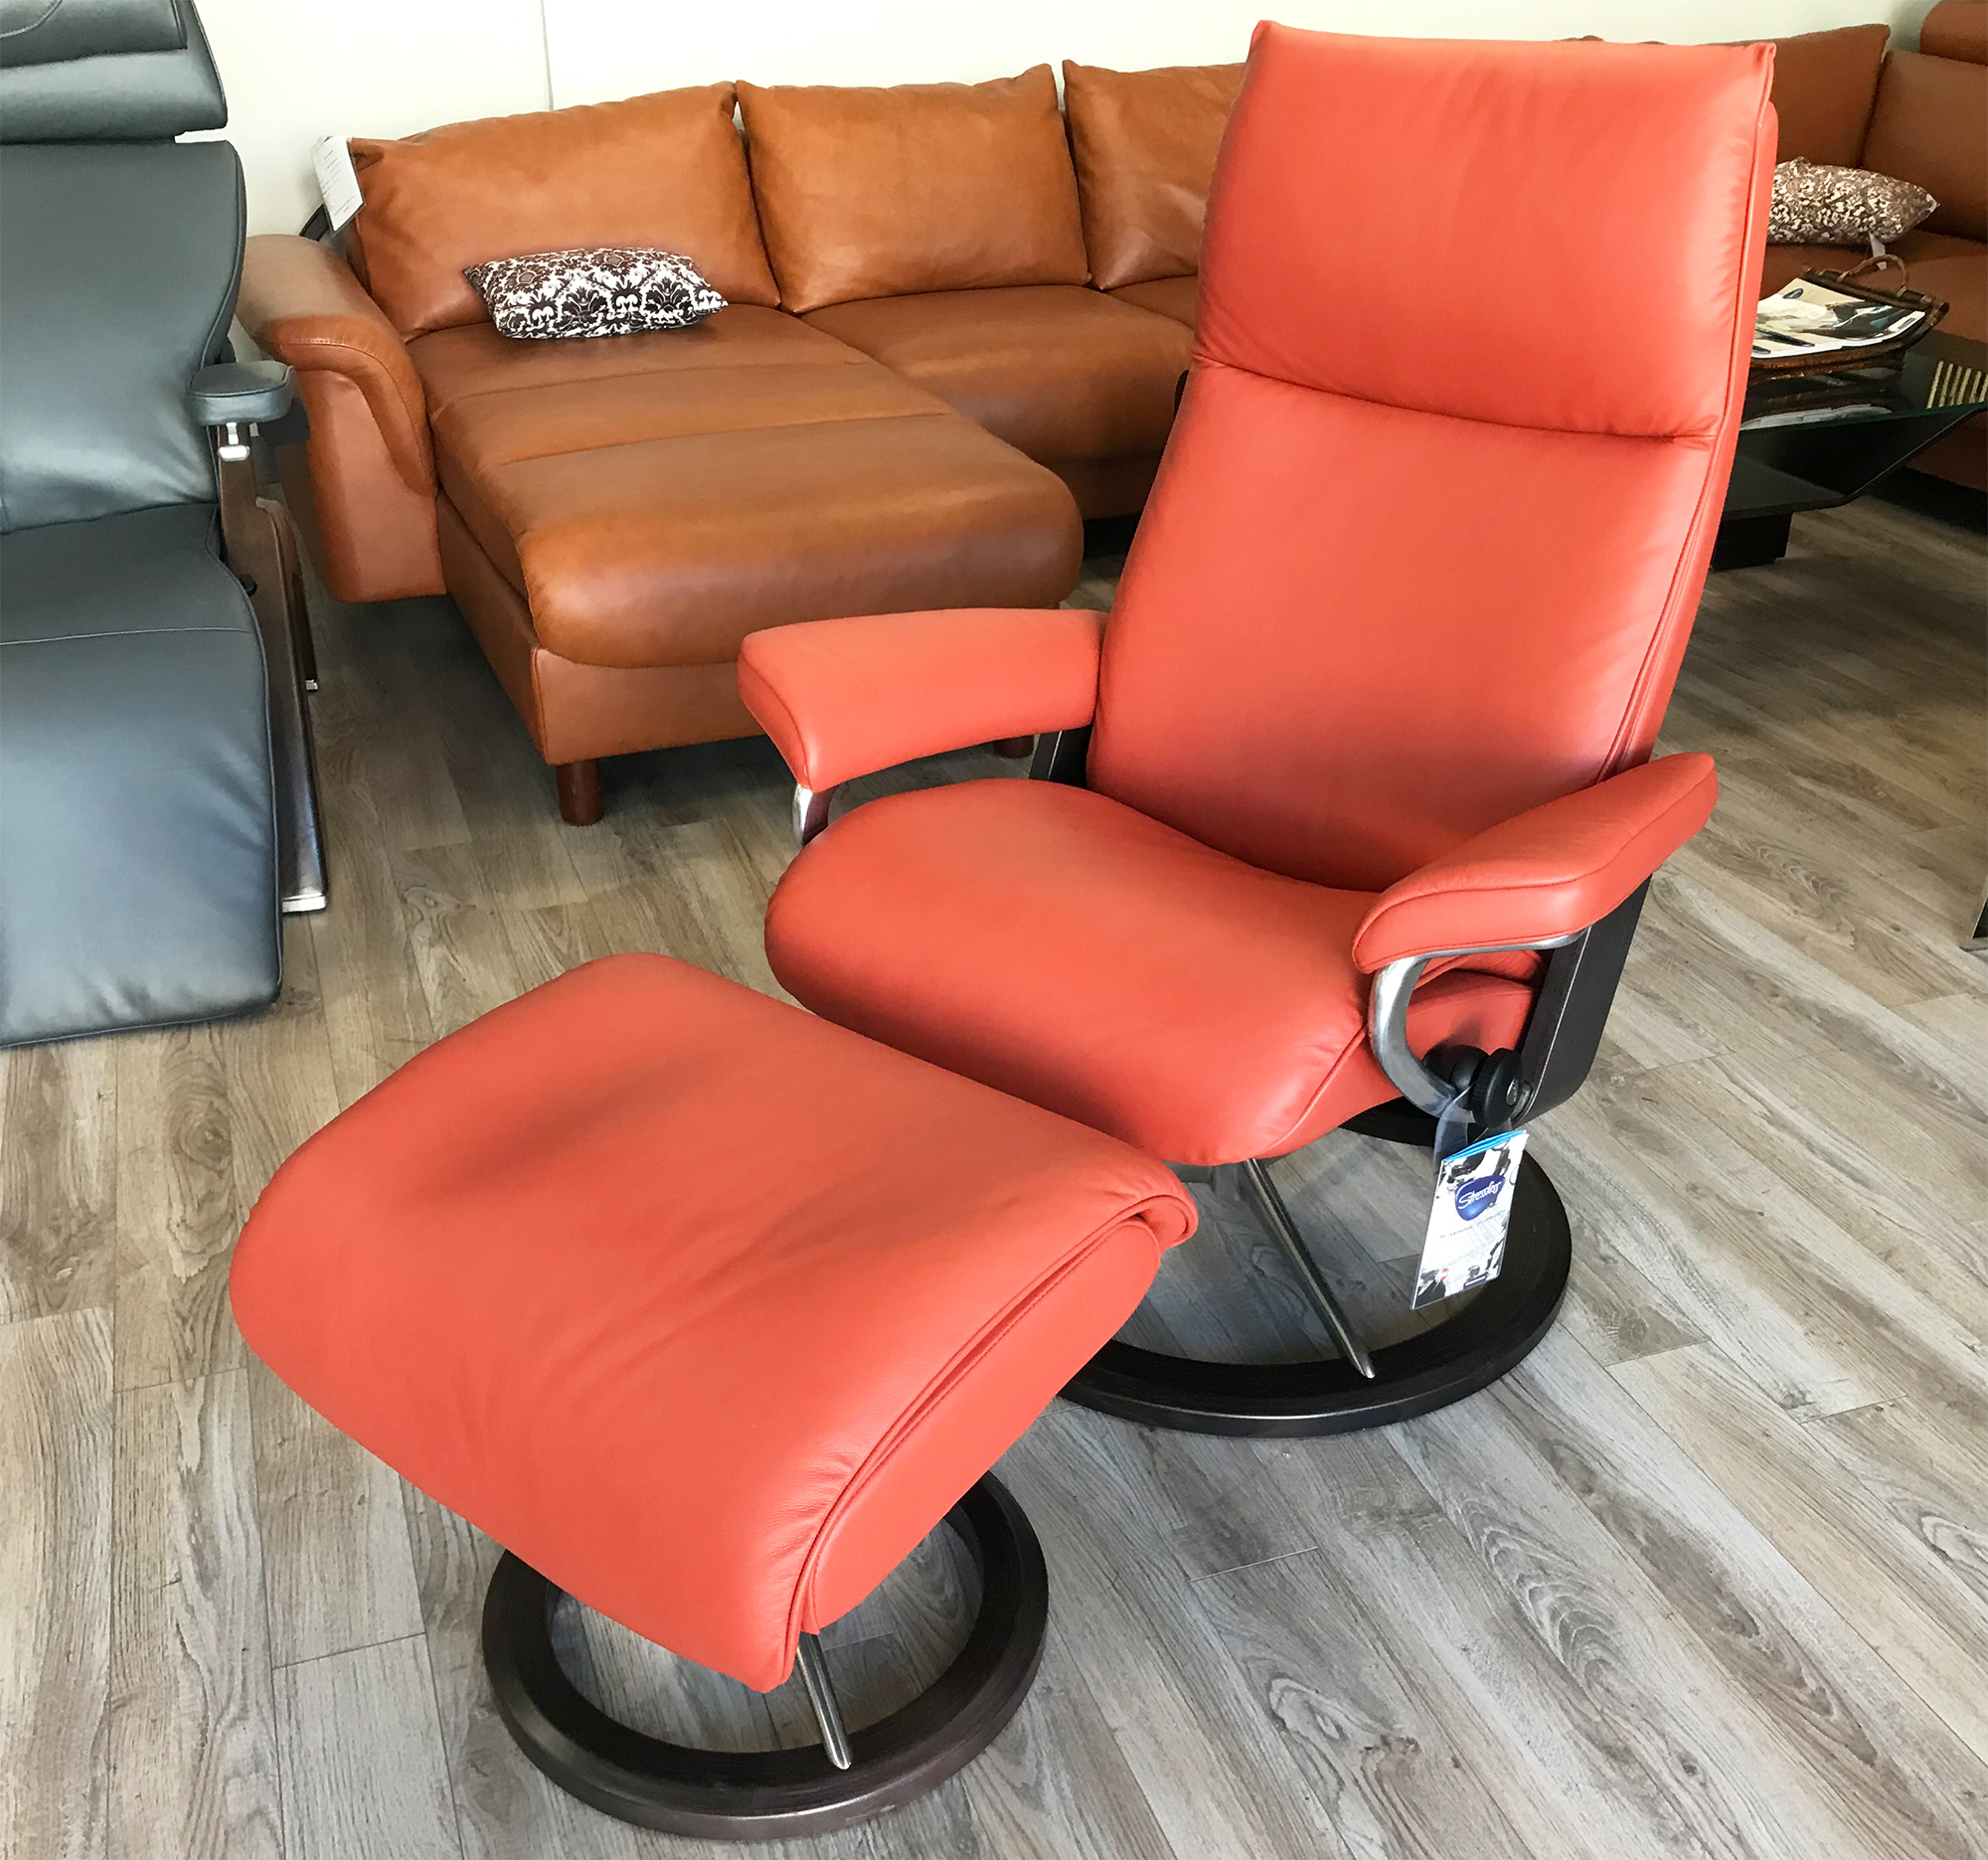 Chair Signature Paloma Stressless Signature by Ottoman Base Leather - Stressless Leather Ekornes Chairs Henna Recliners Paloma Aura Henna Recliner and Base Aura